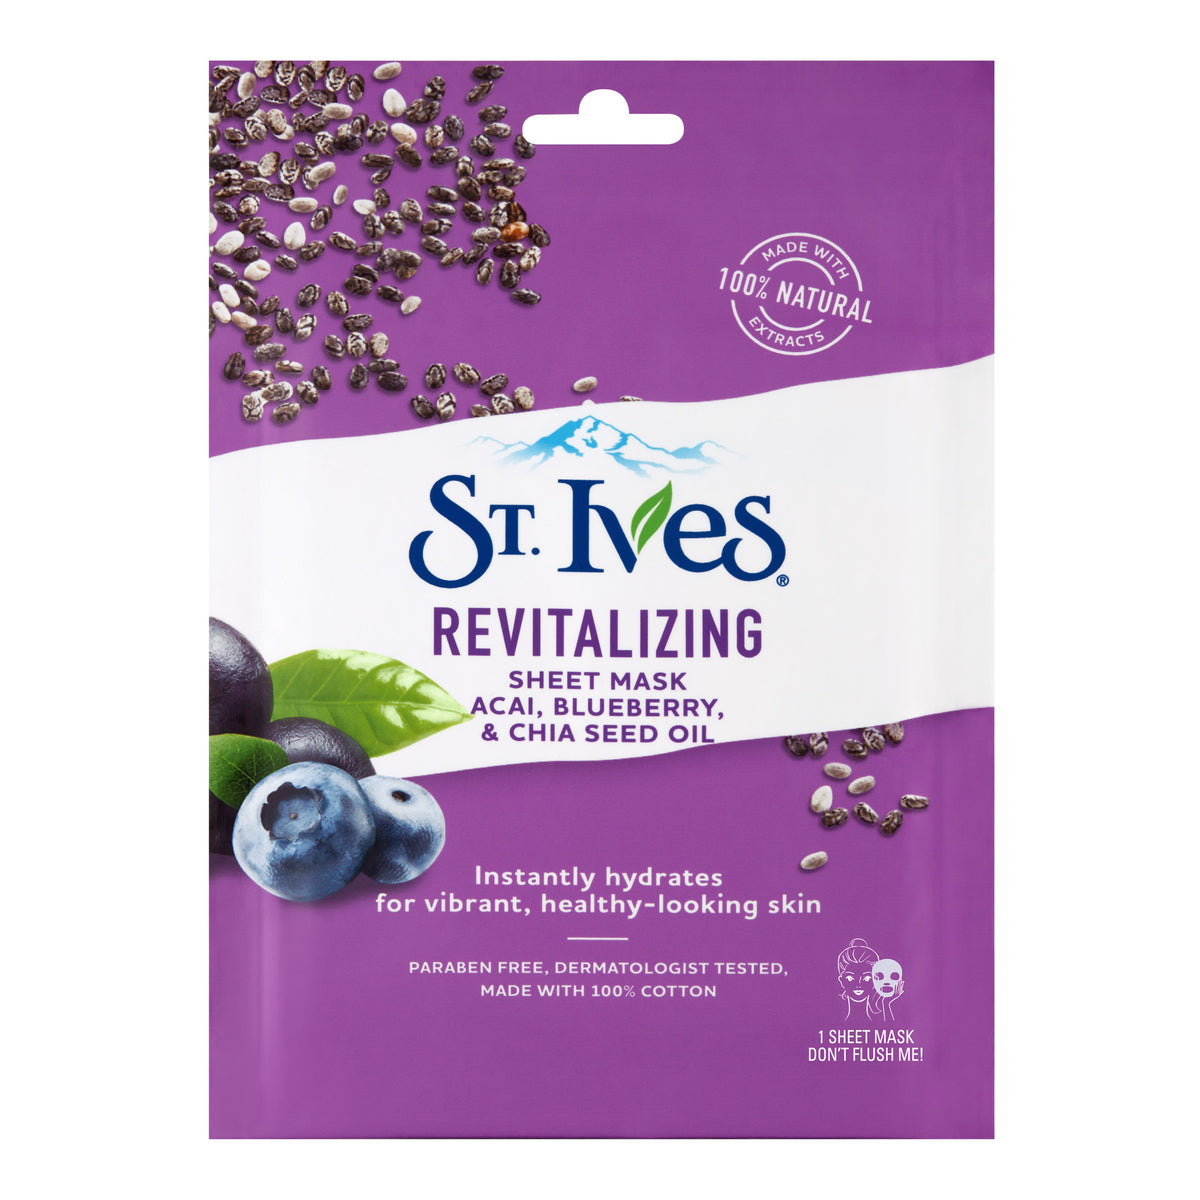 E11 Store, St. Ives Acai, Blueberry & Chia Seed Oil Sheet Mask